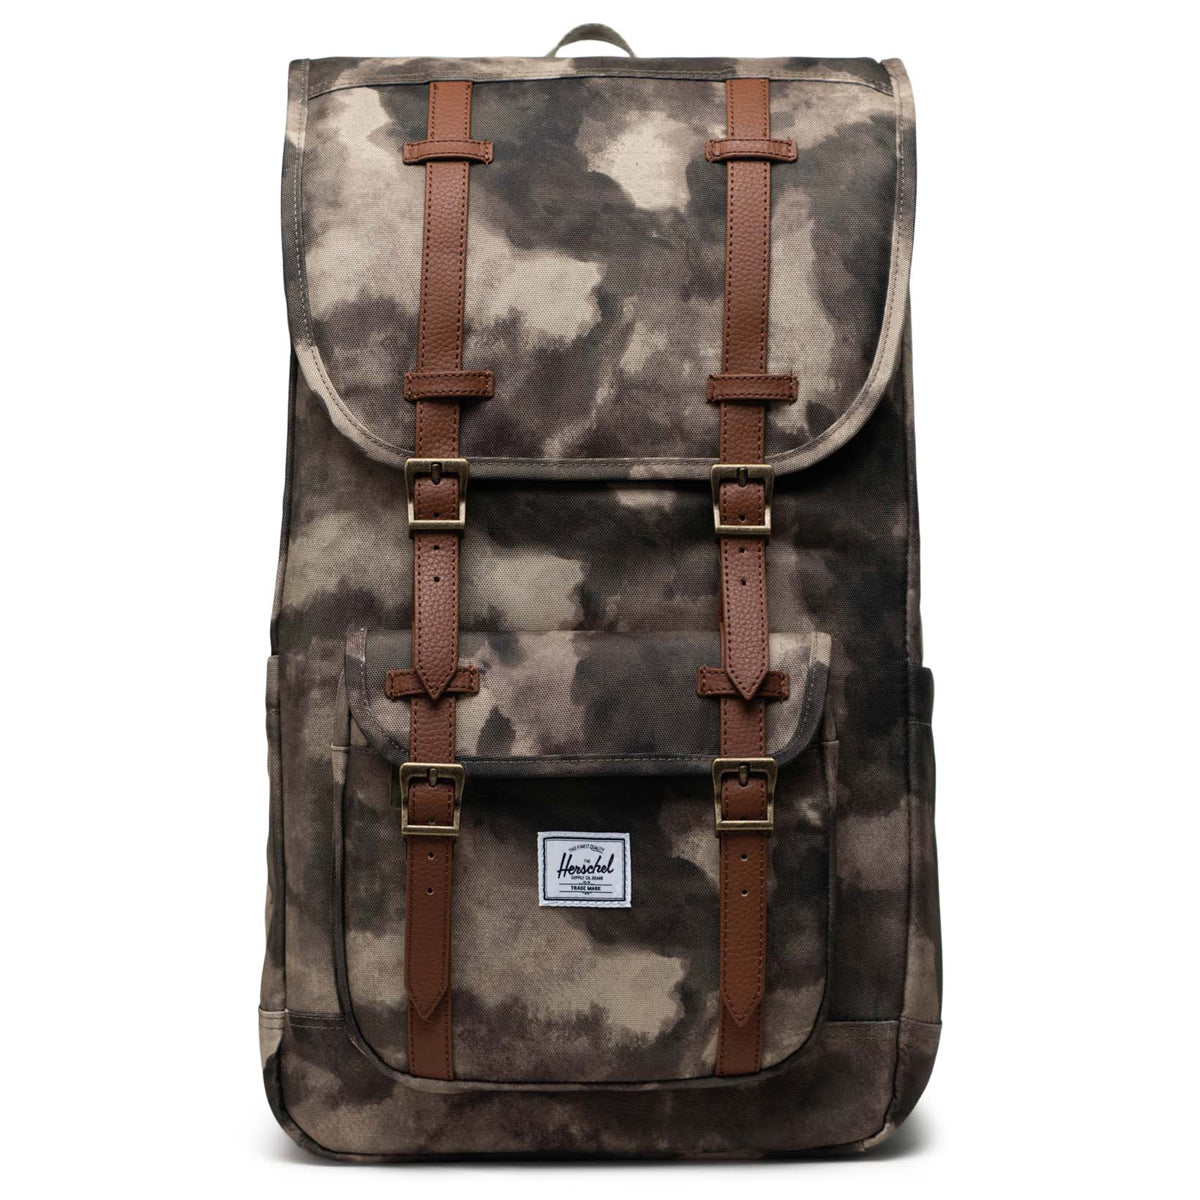 Herschel Supply Little America Backpack - Painted Camo image 1